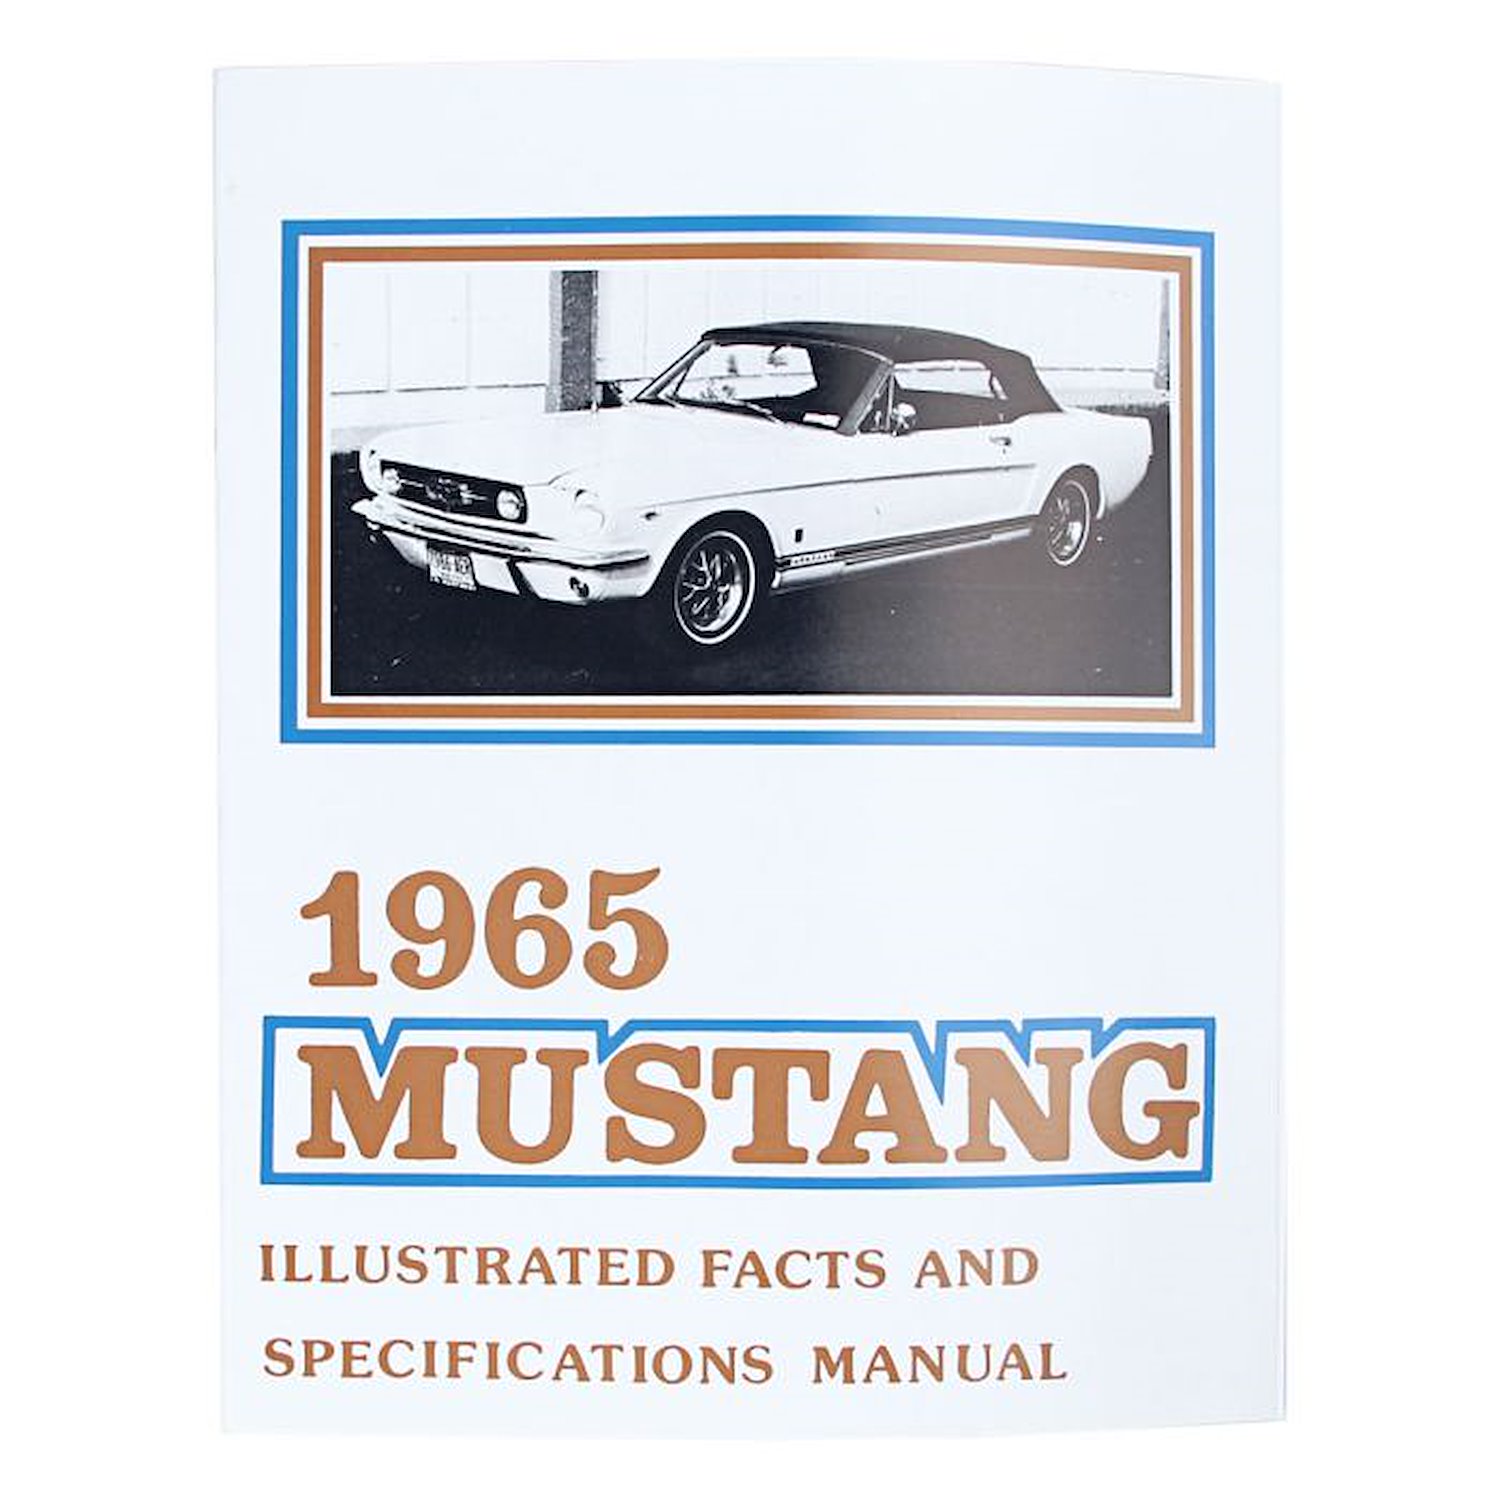 Facts and Specifications Manual for 1965 Ford Mustang